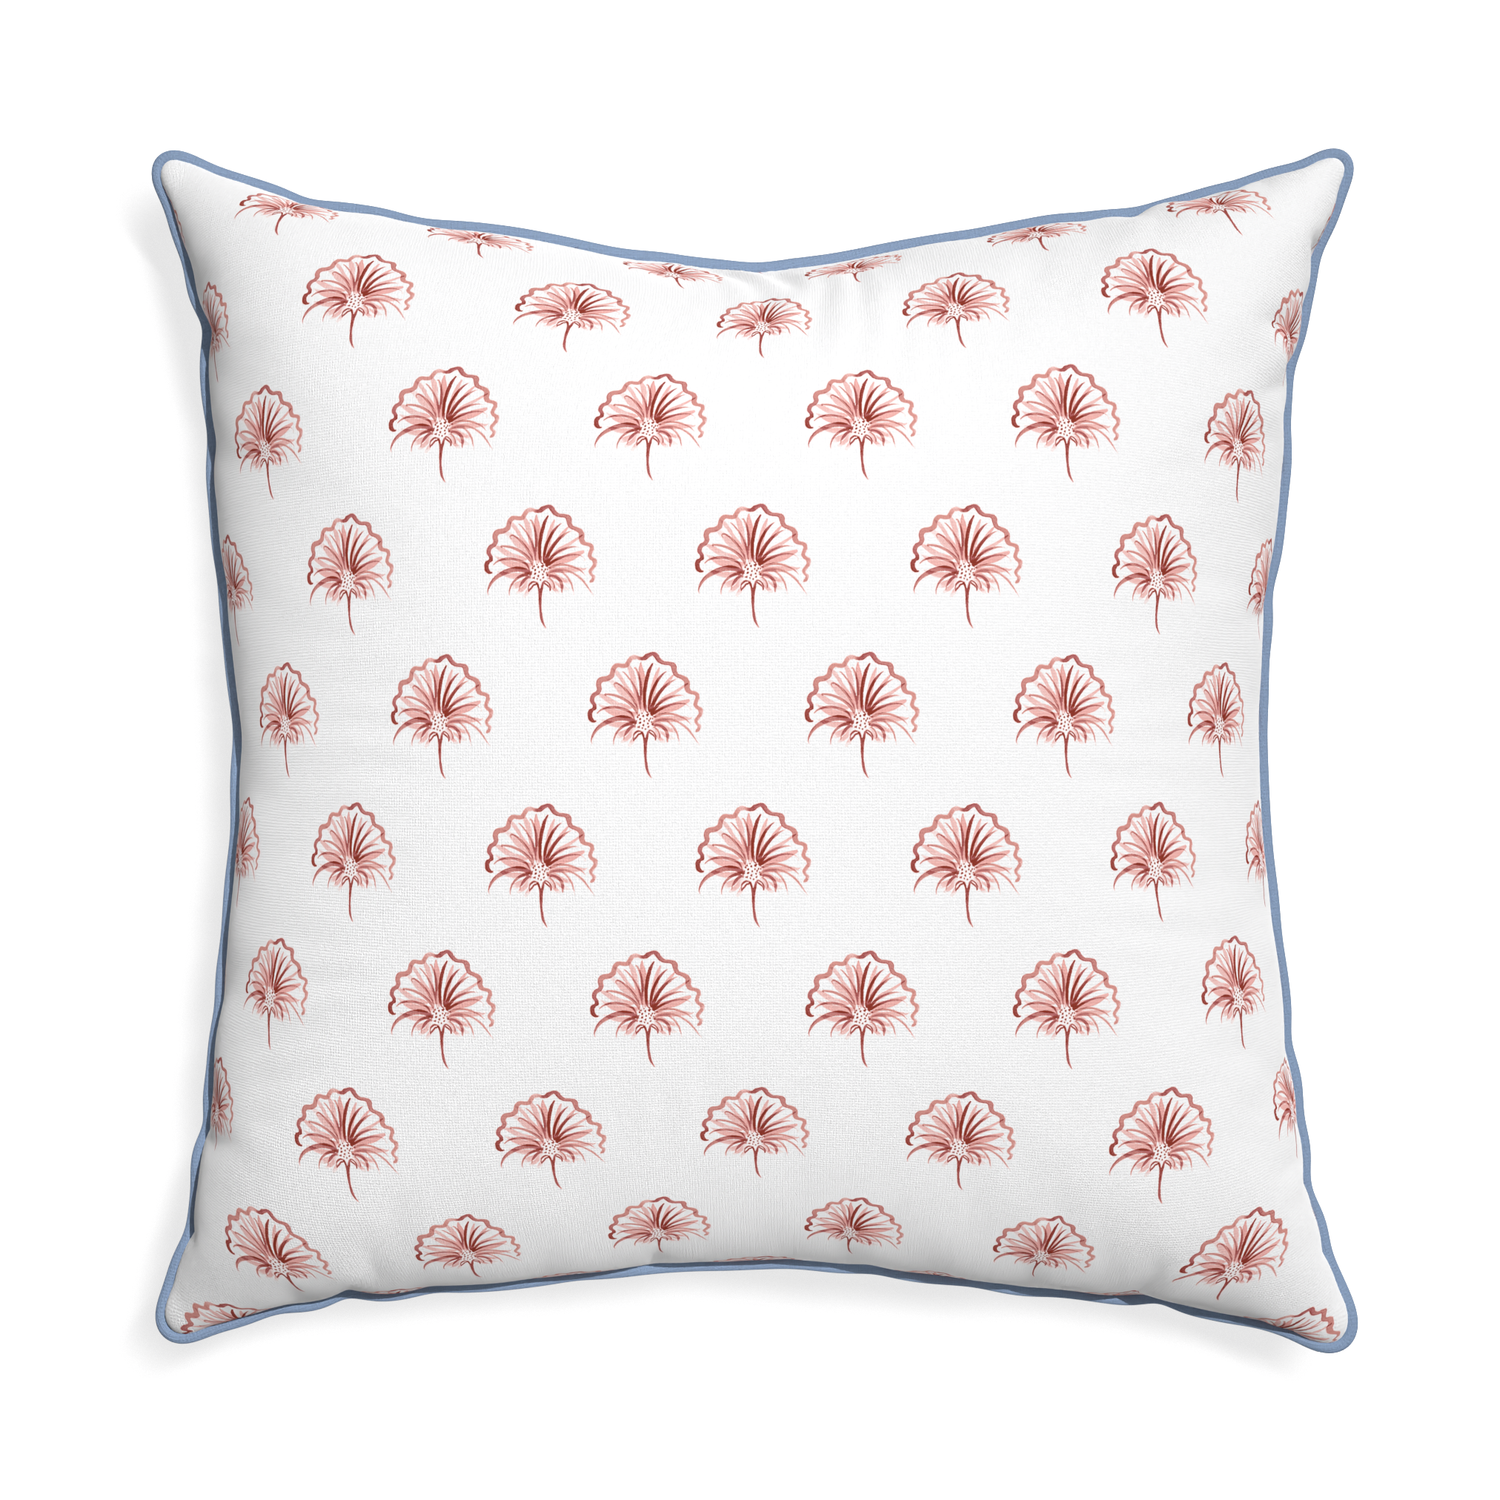 Euro-sham penelope rose custom pillow with sky piping on white background